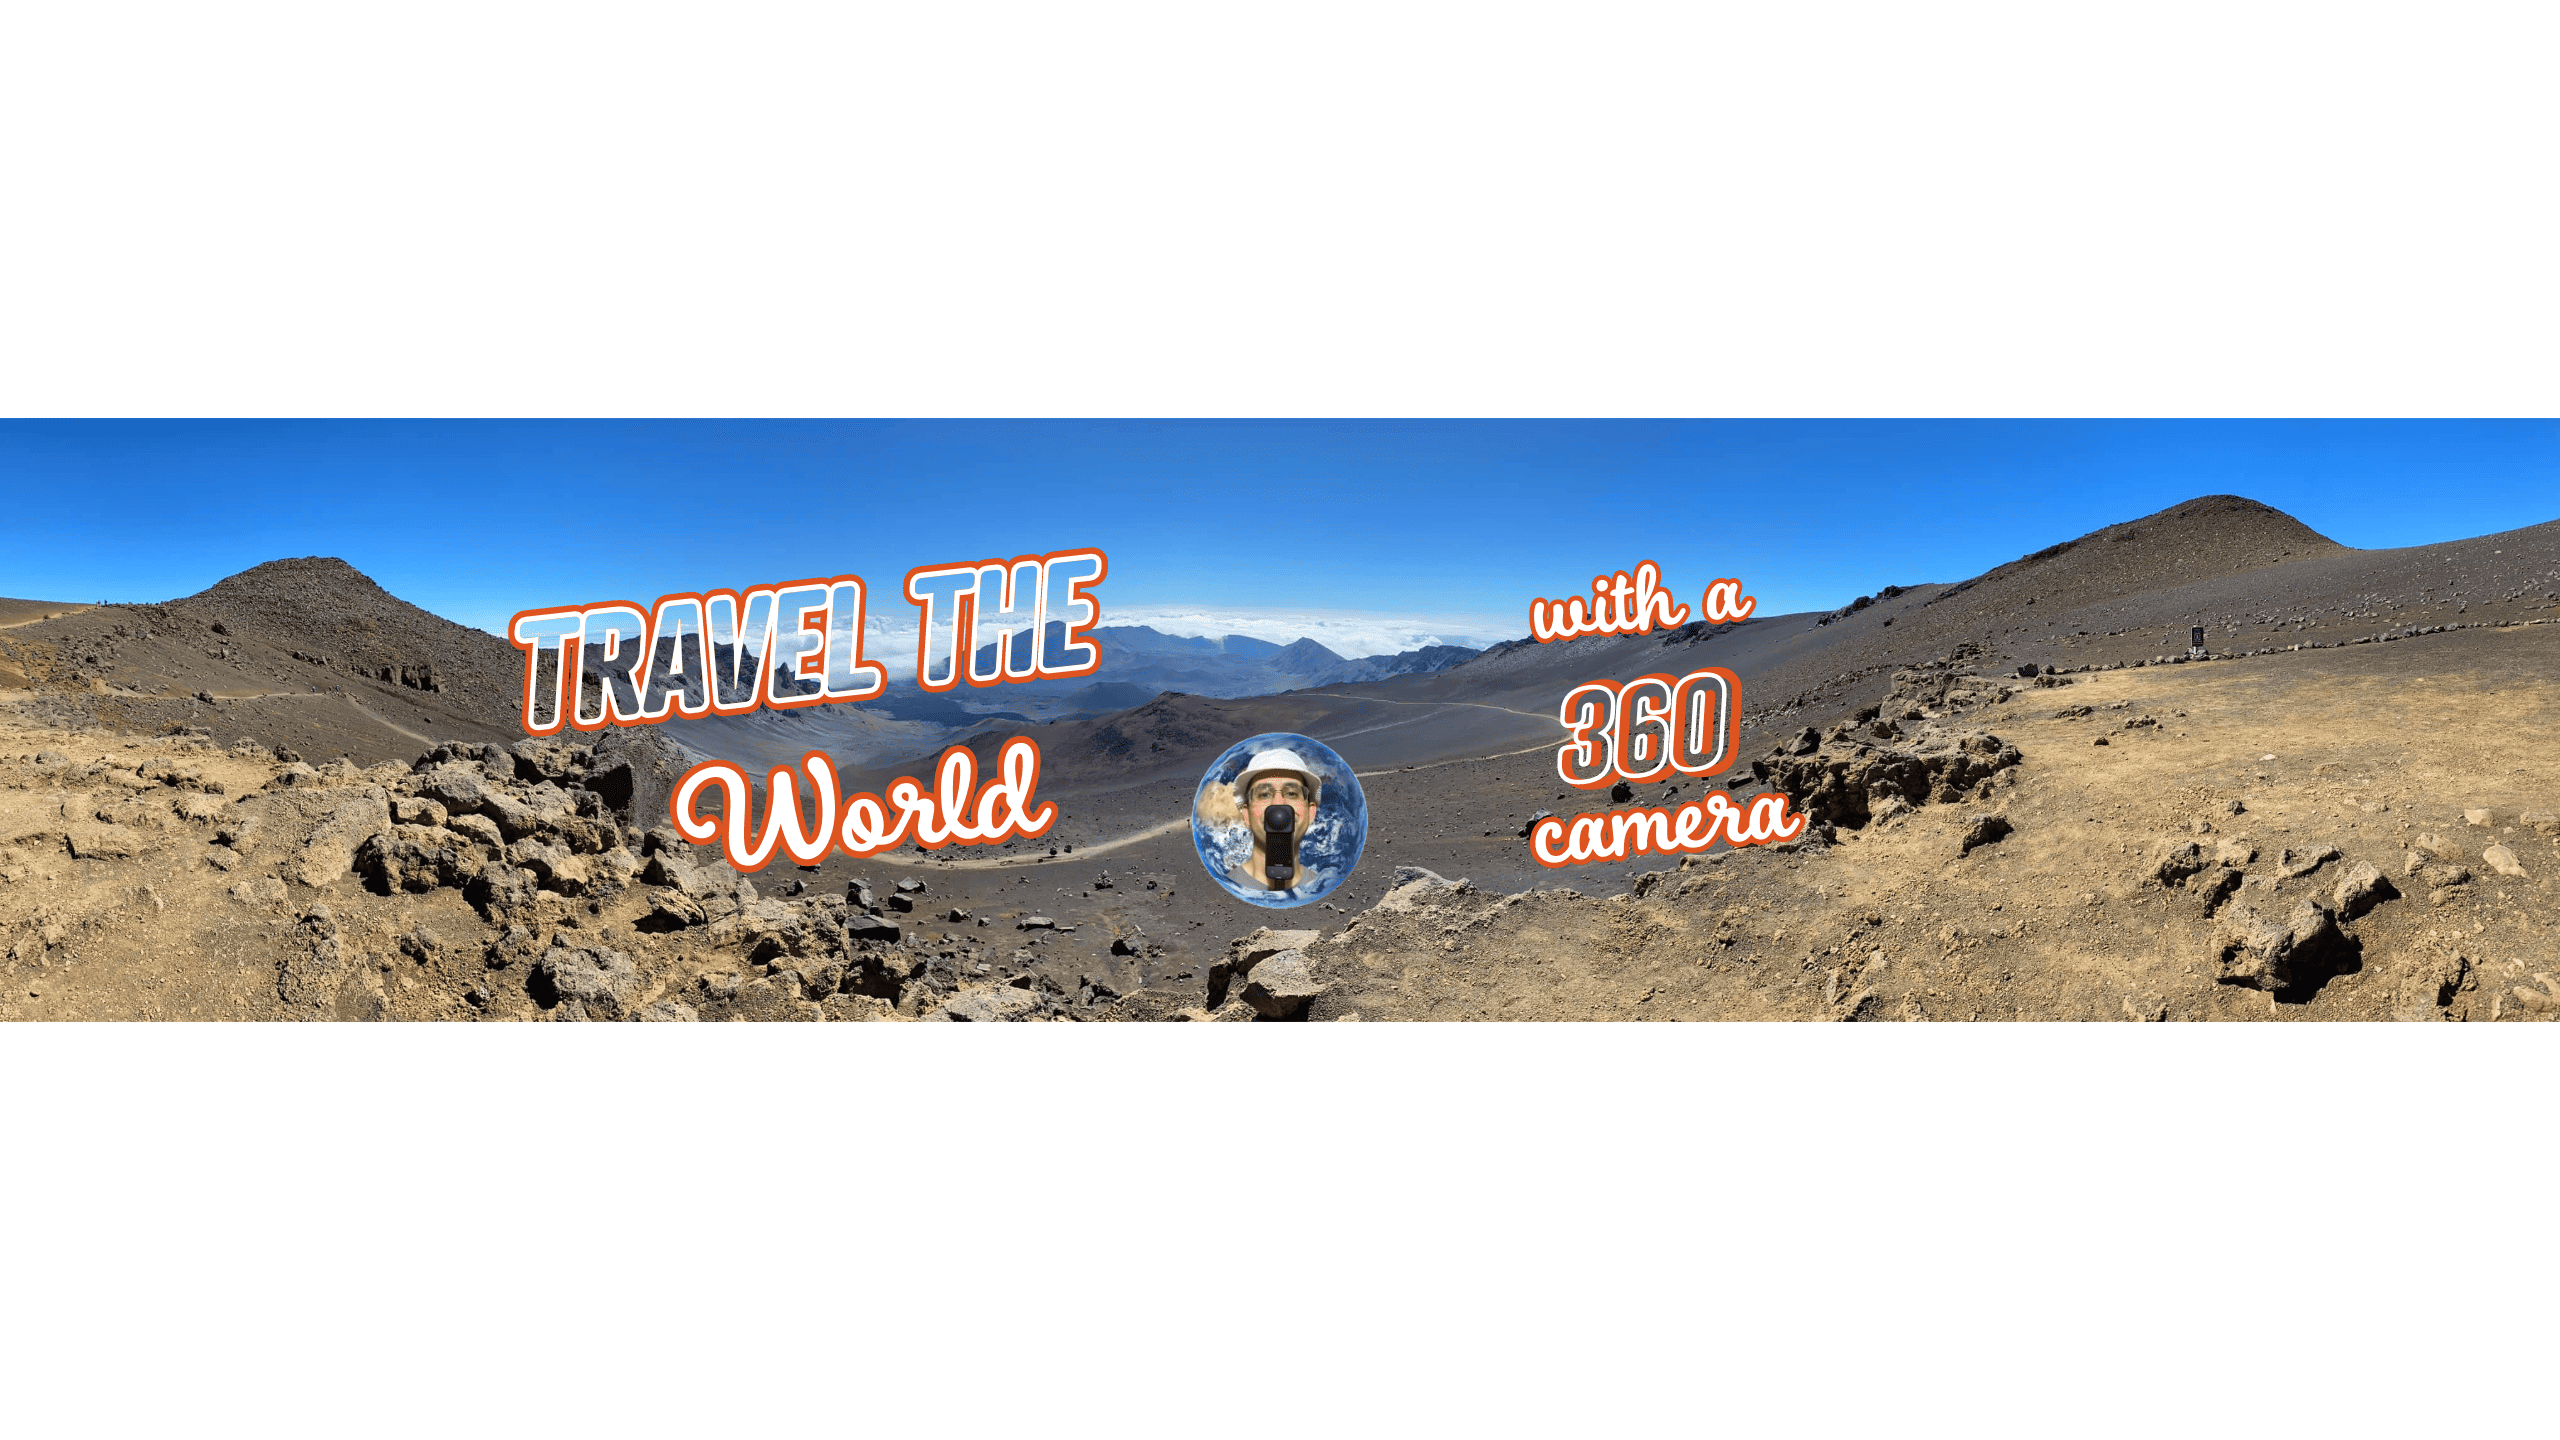 travel the world with 360 camera